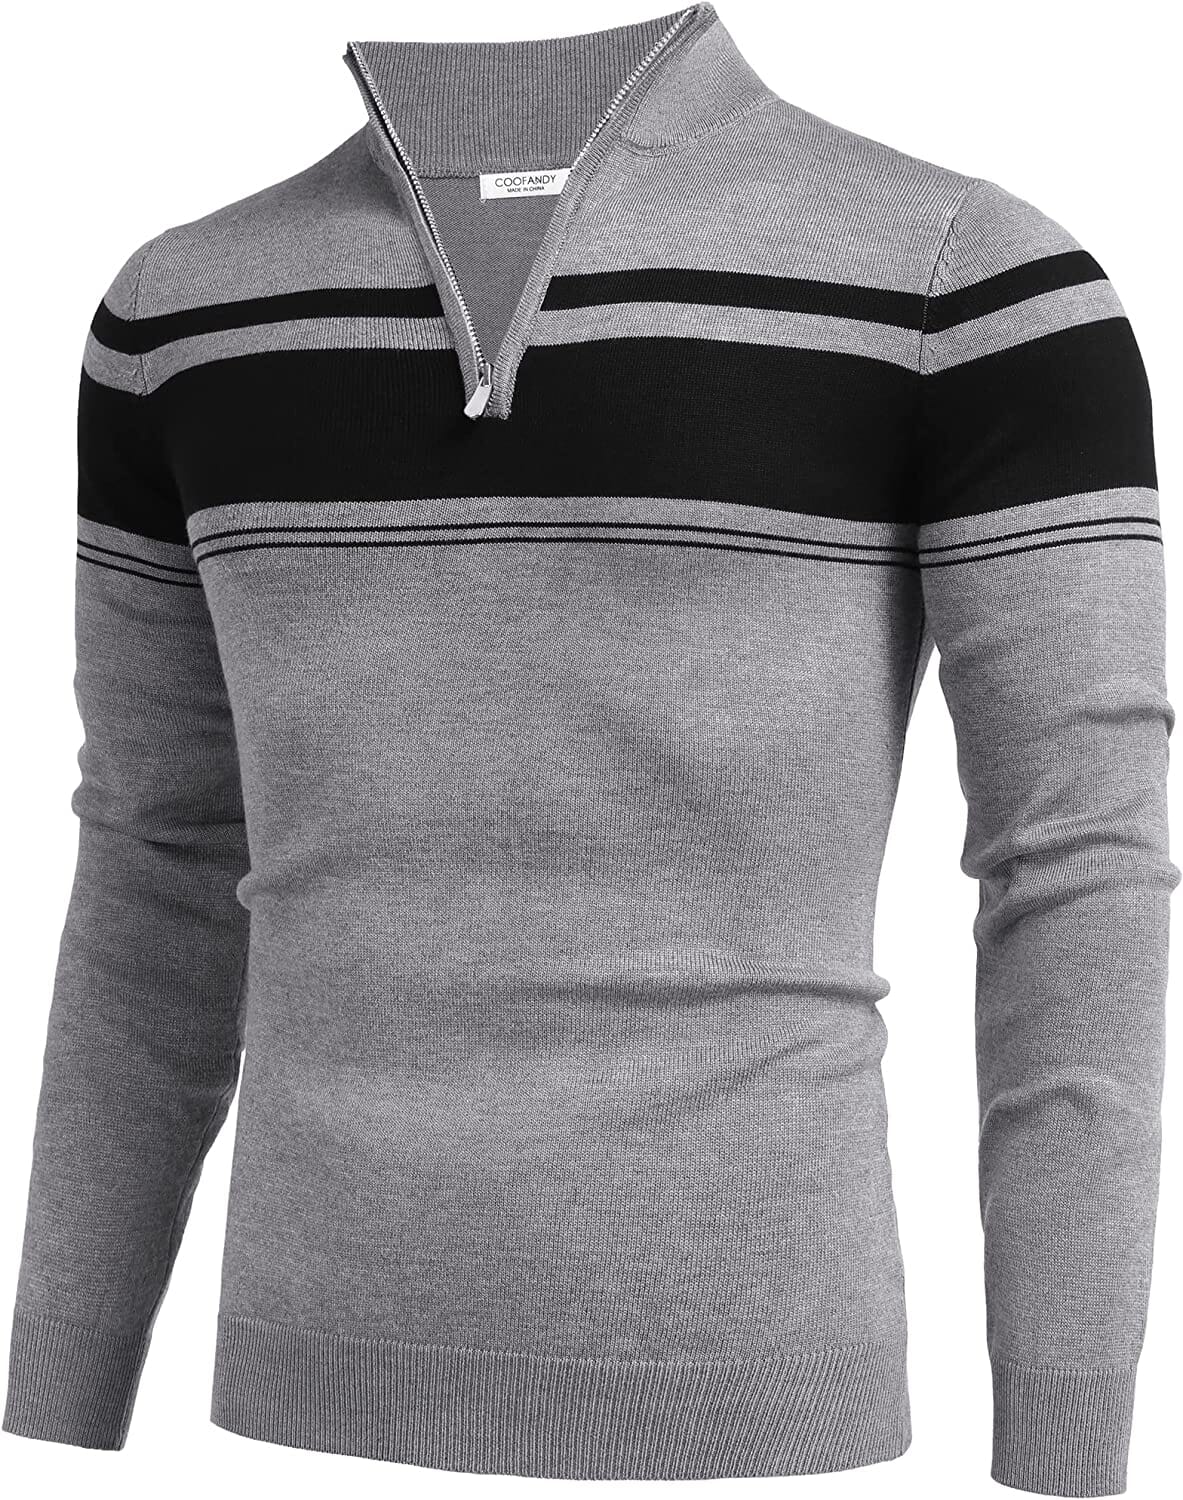 Zip Up Slim Fit Lightweight Pullover Polo Sweater (US Only) Fashion Hoodies & Sweatshirts COOFANDY Store Black & Heather Grey S 